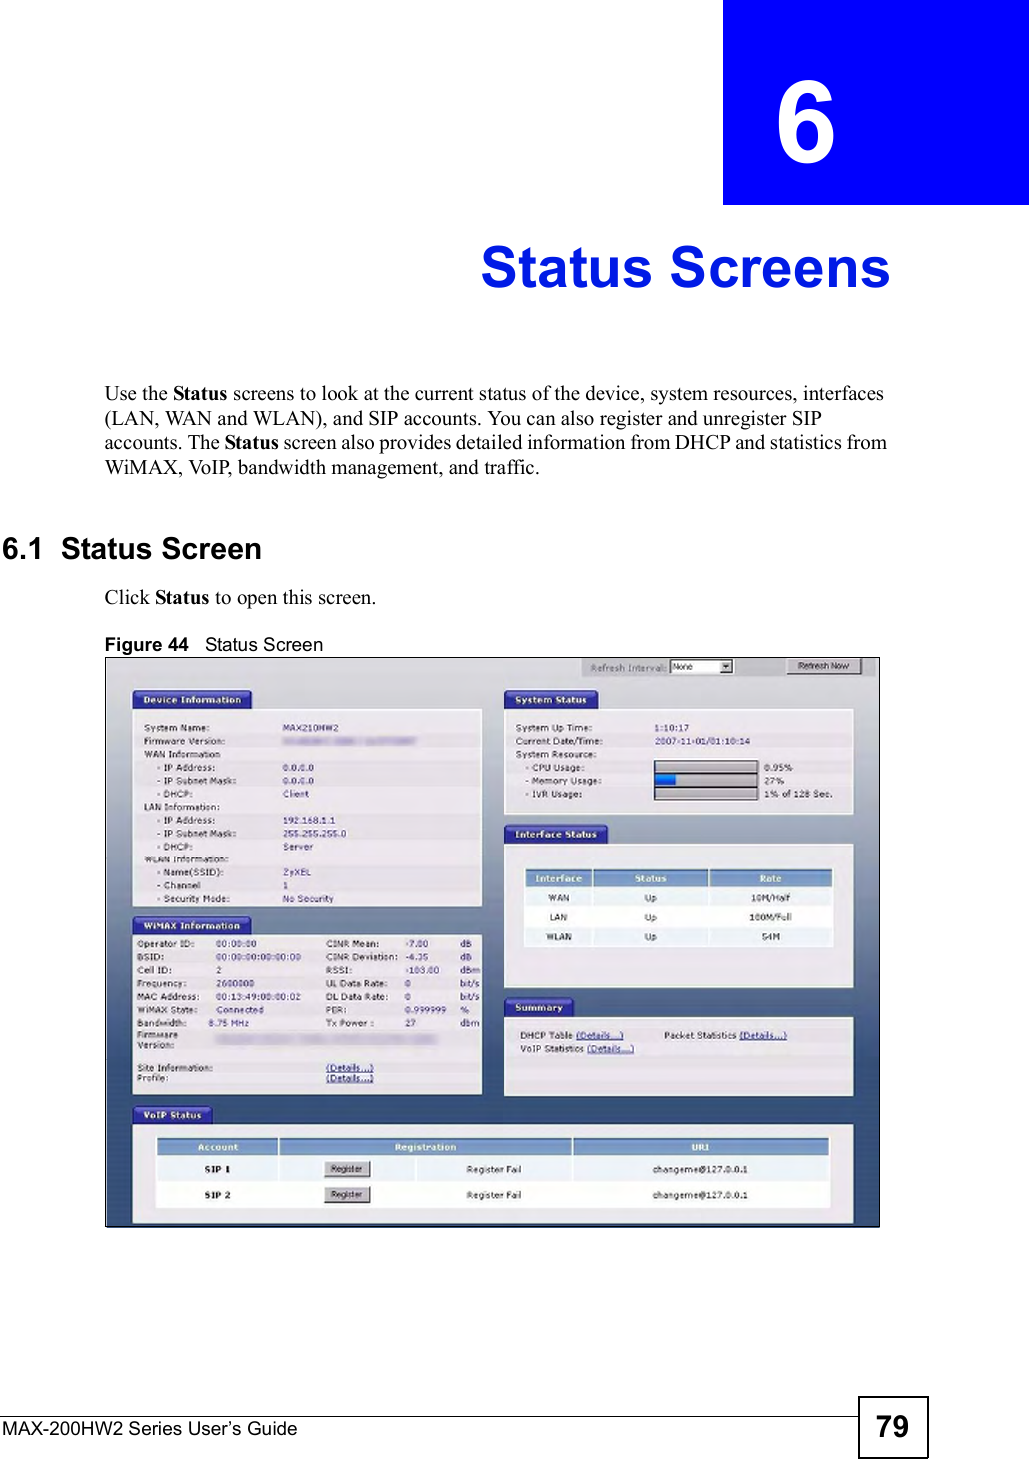 MAX-200HW2 Series User s Guide 79CHAPTER  6 Status ScreensUse the Status screens to look at the current status of the device, system resources, interfaces (LAN, WAN and WLAN), and SIP accounts. You can also register and unregister SIP accounts. The Status screen also provides detailed information from DHCP and statistics from WiMAX, VoIP, bandwidth management, and traffic.6.1  Status ScreenClick Status to open this screen.Figure 44   Status Screen